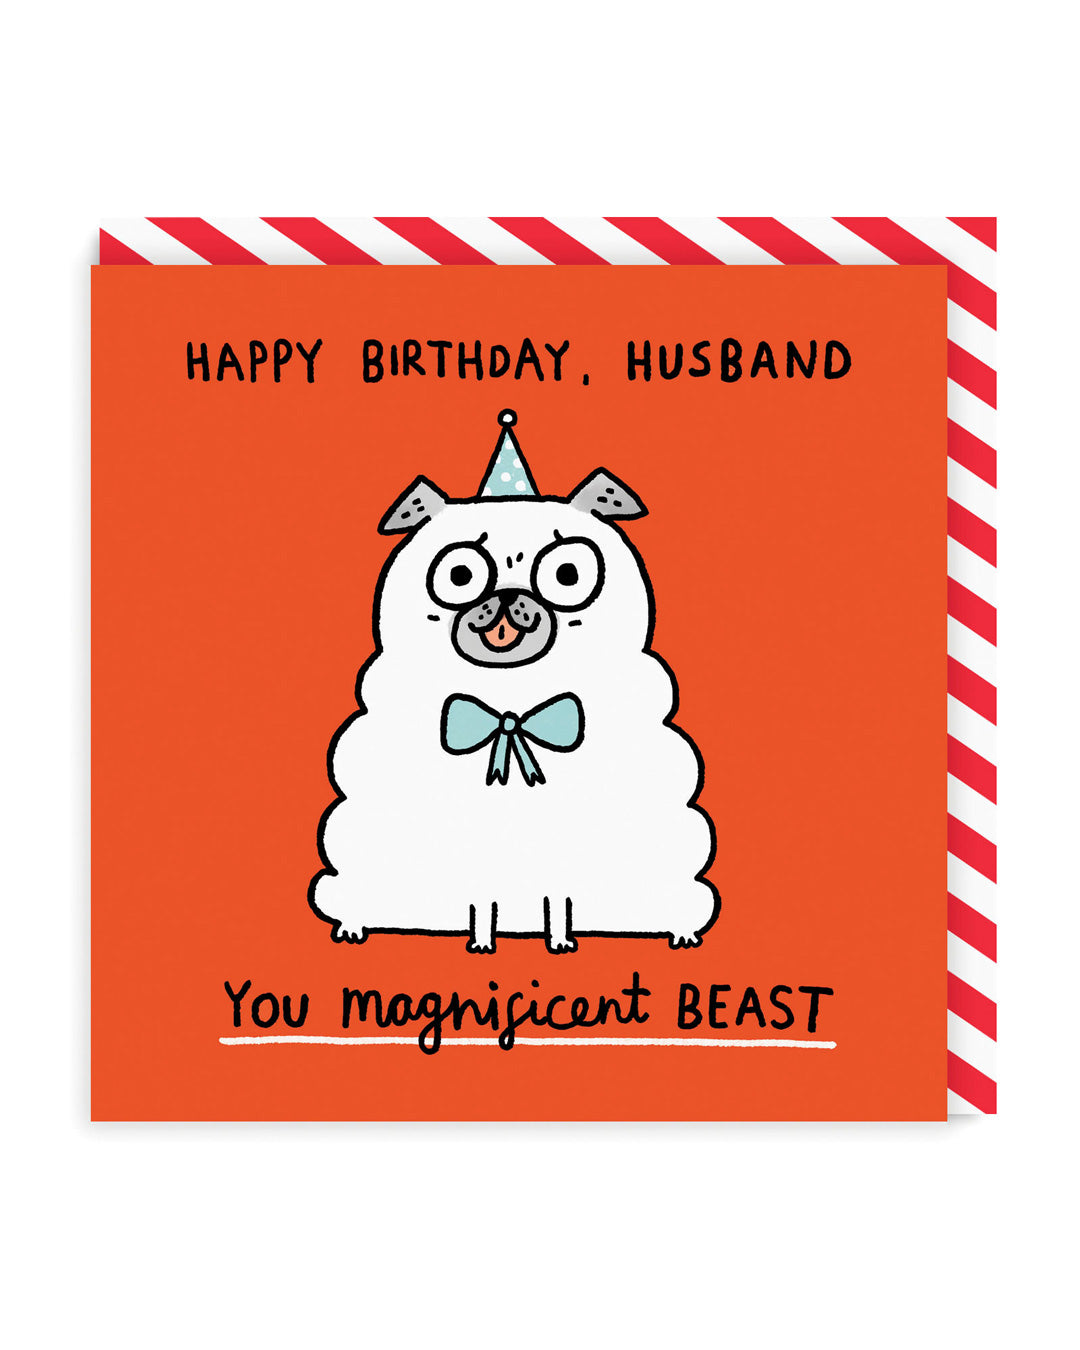 Funny Birthday Card for Husband Magnificent Beast Square Birthday Greeting Card